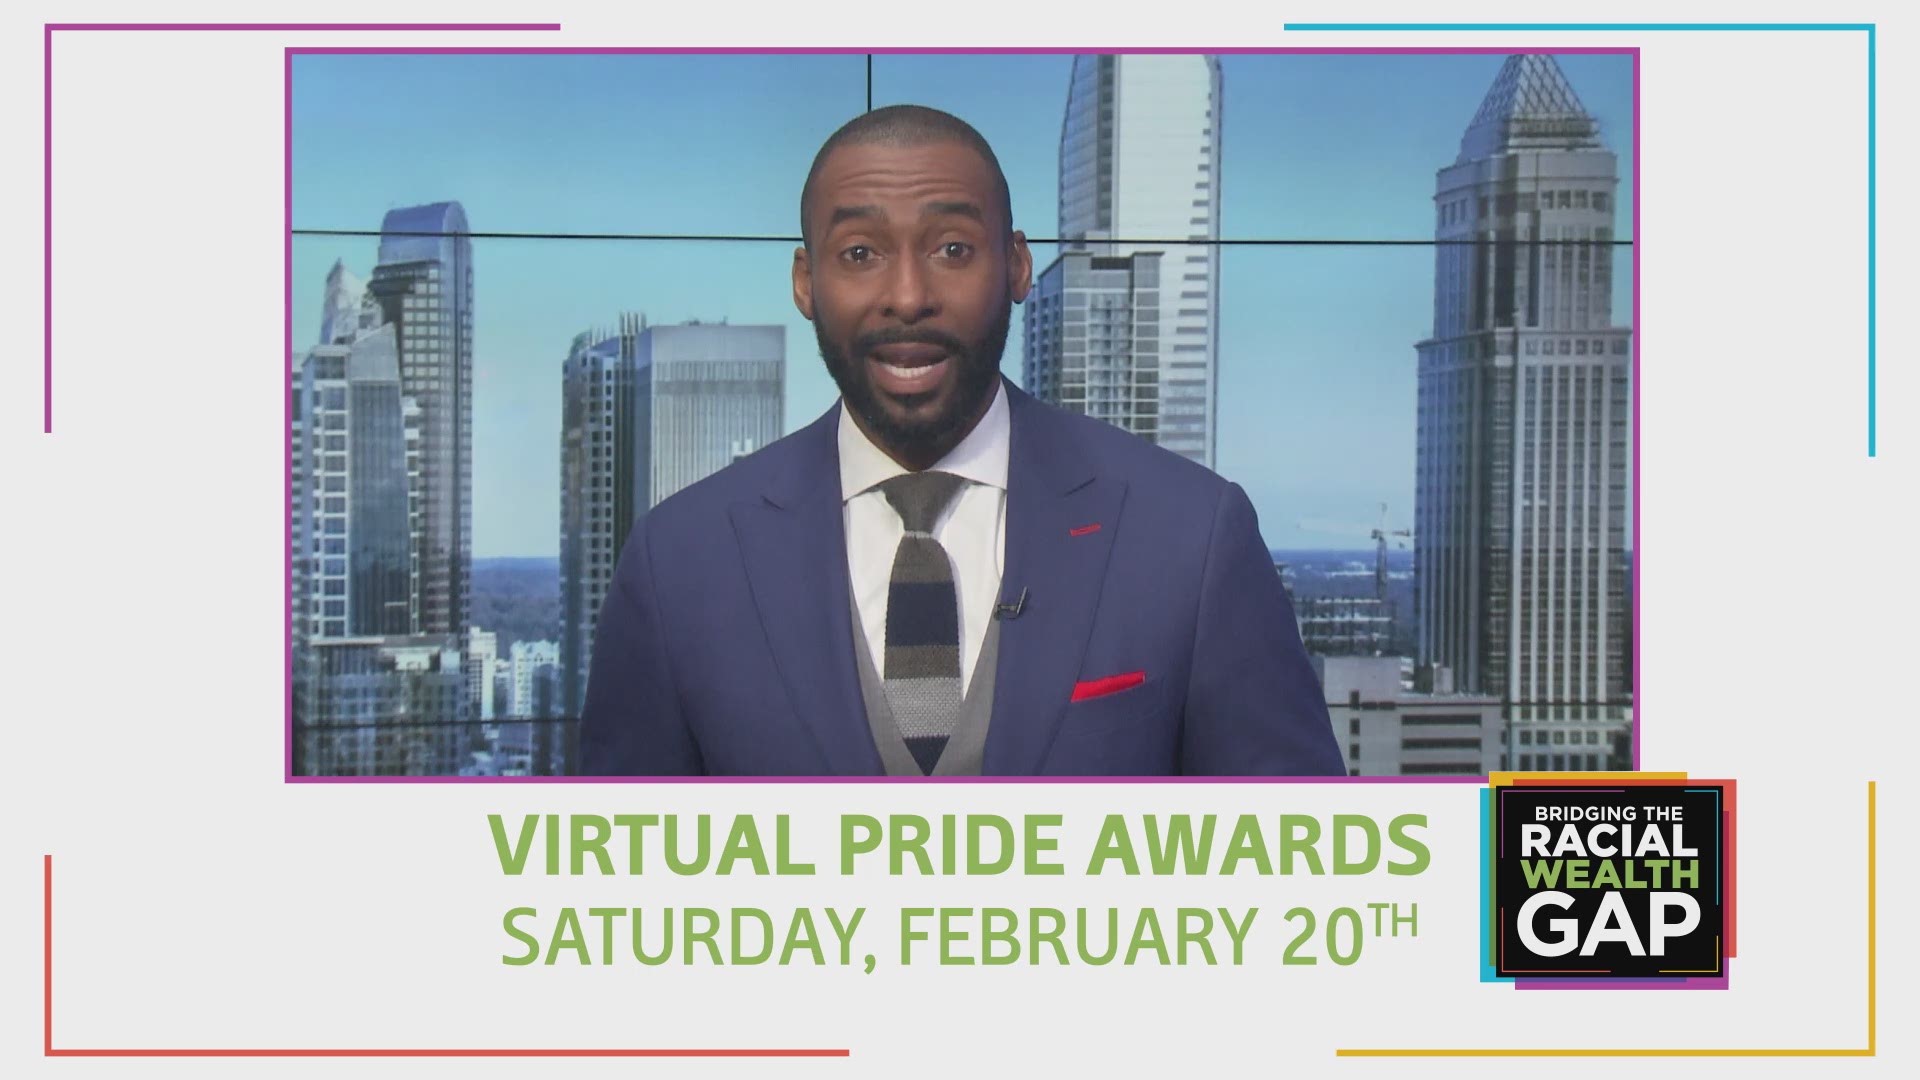 The Pride Awards will be hosted by WCNC Charlotte anchor Fred Shropshire on February 20.